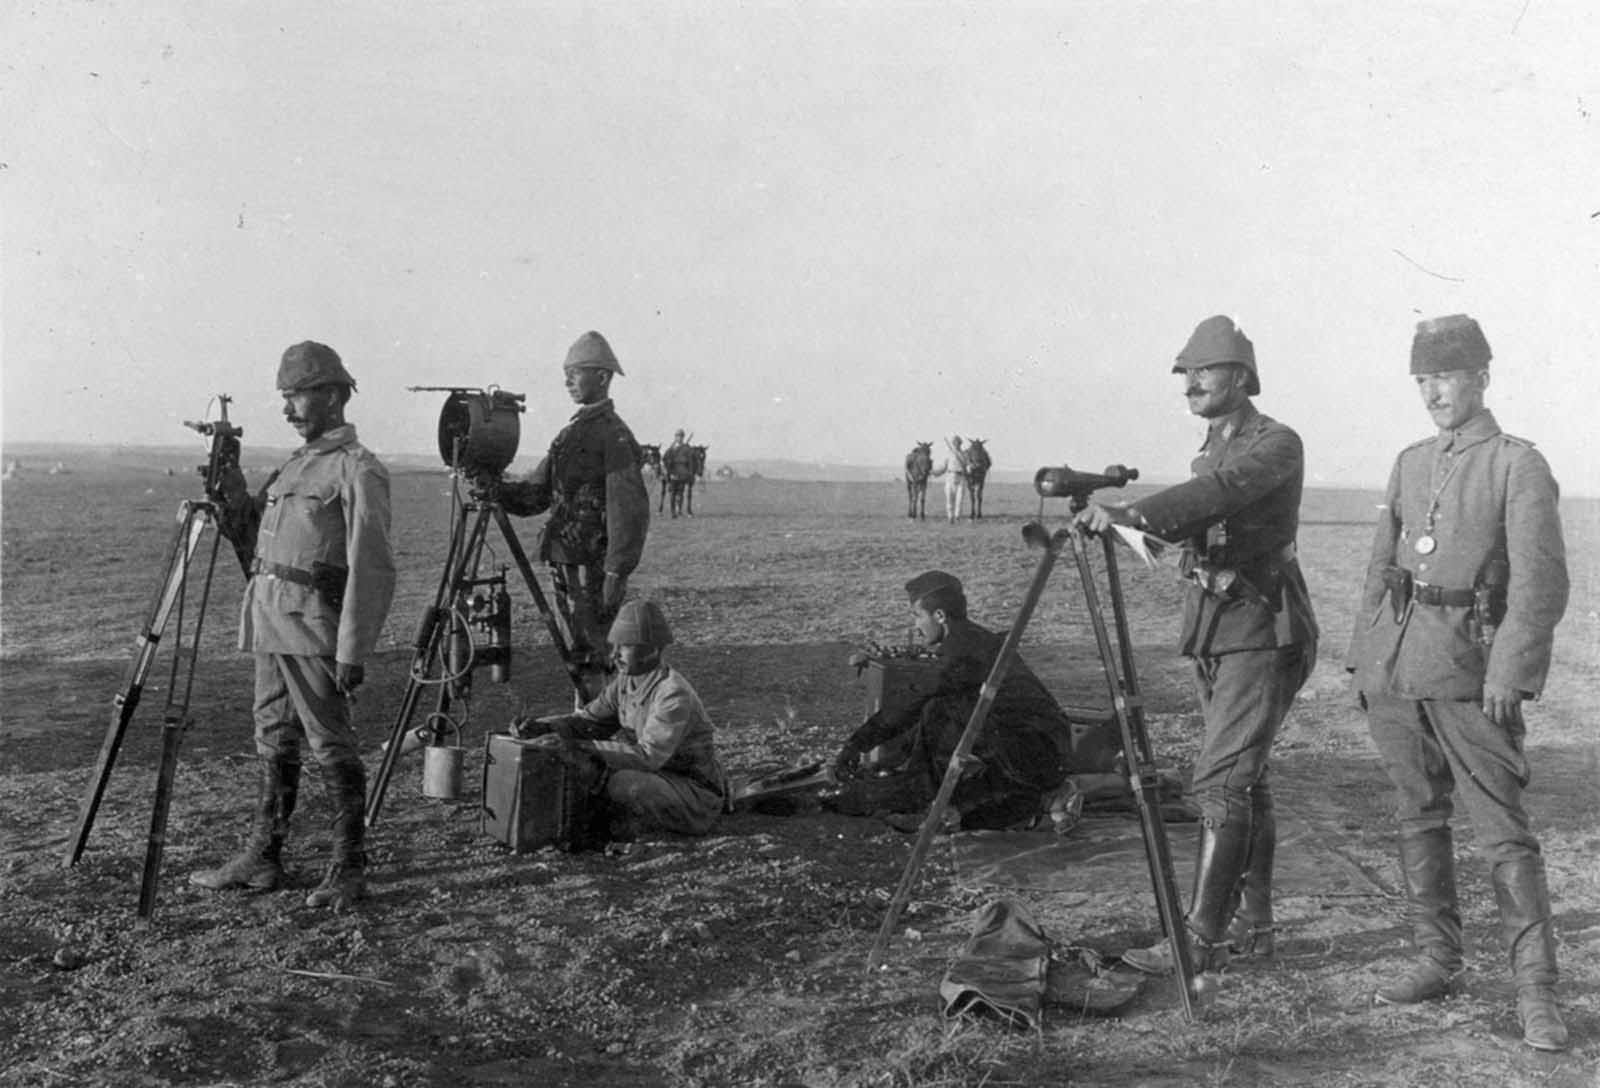 Turkish troops use a heliograph at Huj, near Aza City, in 1917. A heliograph is a wireless solar telegraph that signals by flashes of sunlight usually using Morse code, reflected by a mirror.